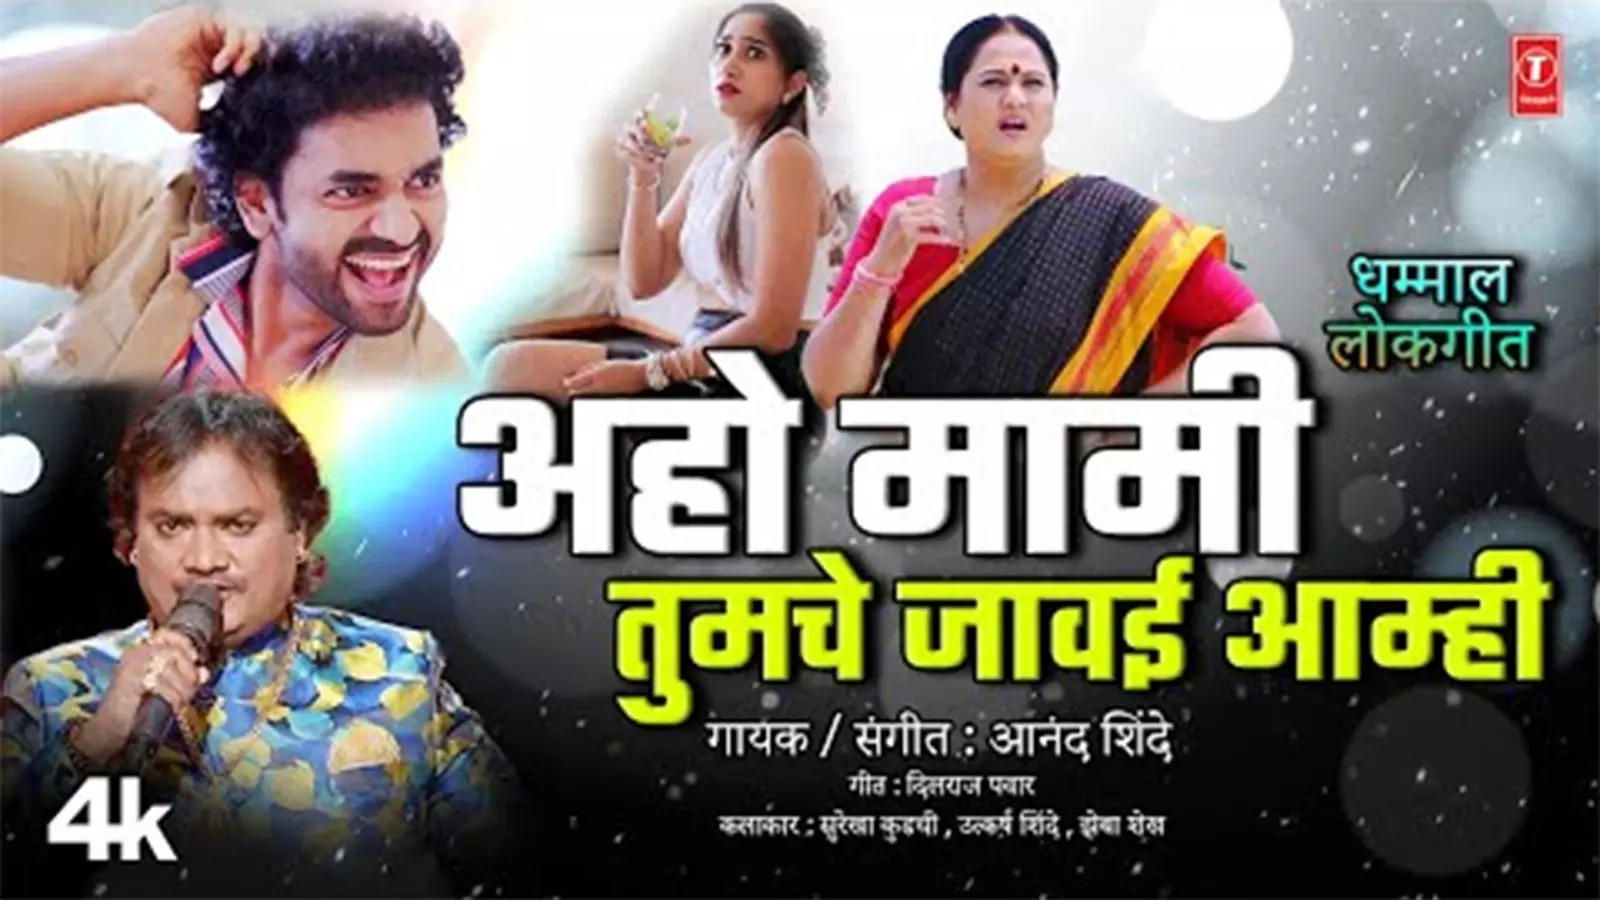 Check Out Latest Marathi Song Music Video 'Aaho Maami Tumche Javai Aamhi'  Sung By Anand Shinde | Marathi Video Songs – Celebrity Land International